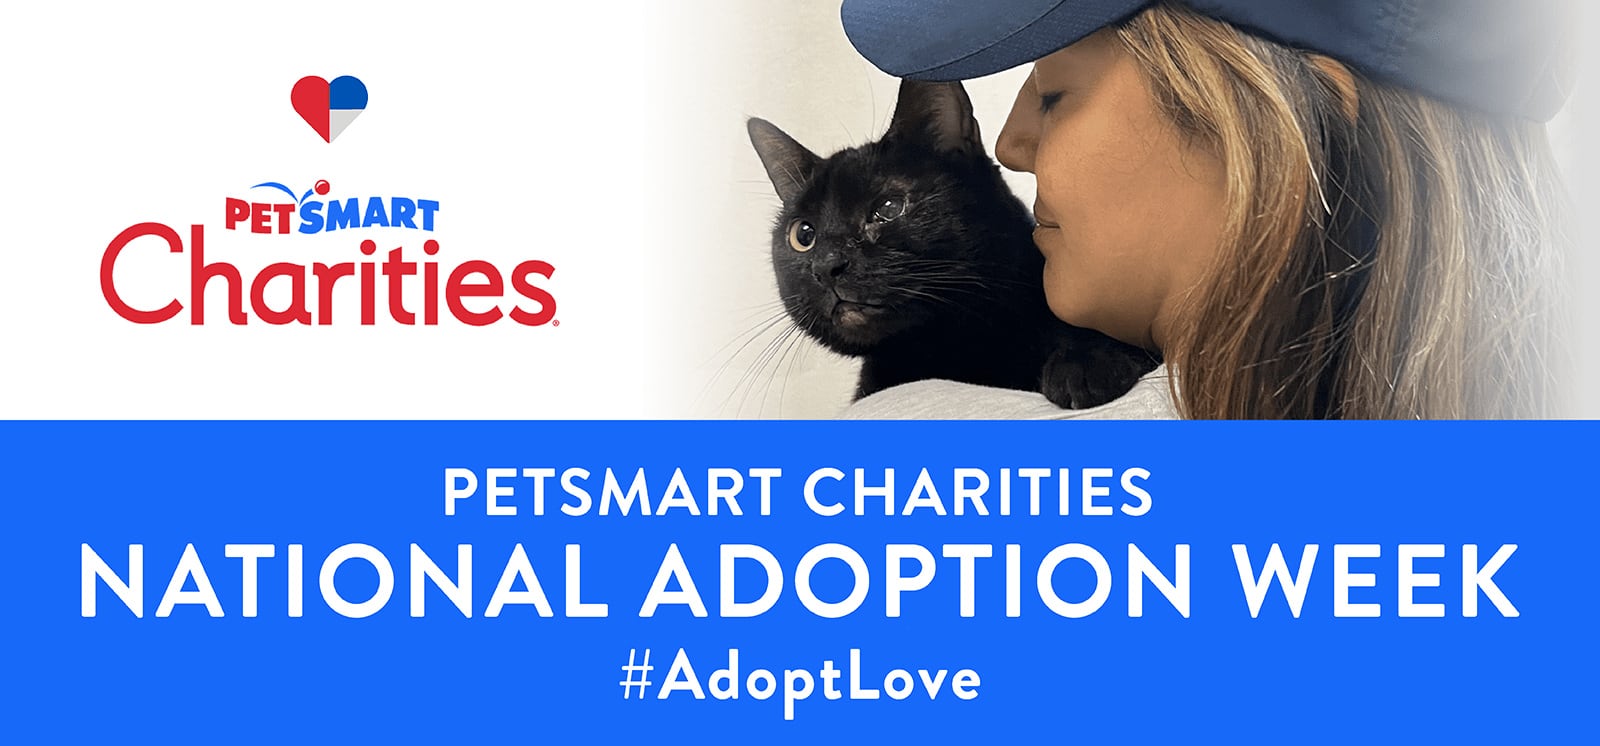 PetSmart Charities logo and image of a woman in a ballcap holding a black cat